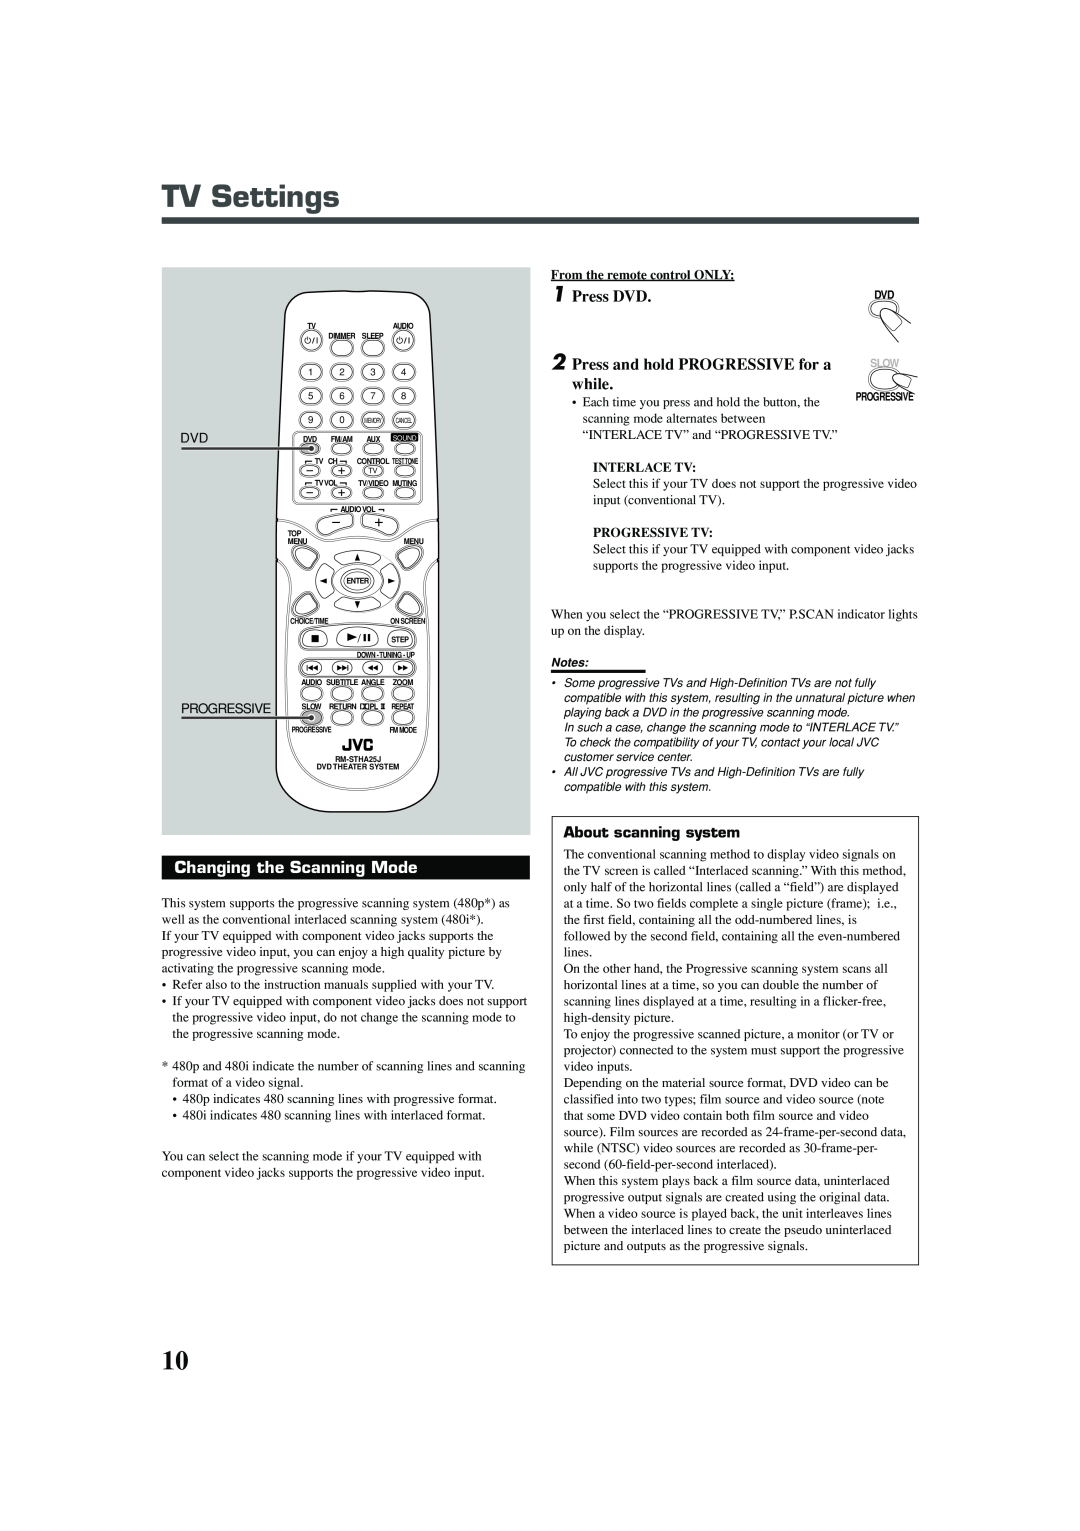 JVC TH-A25 manual TV Settings, Press DVD, Press and hold PROGRESSIVE for a, while, Changing the Scanning Mode, Progressive 